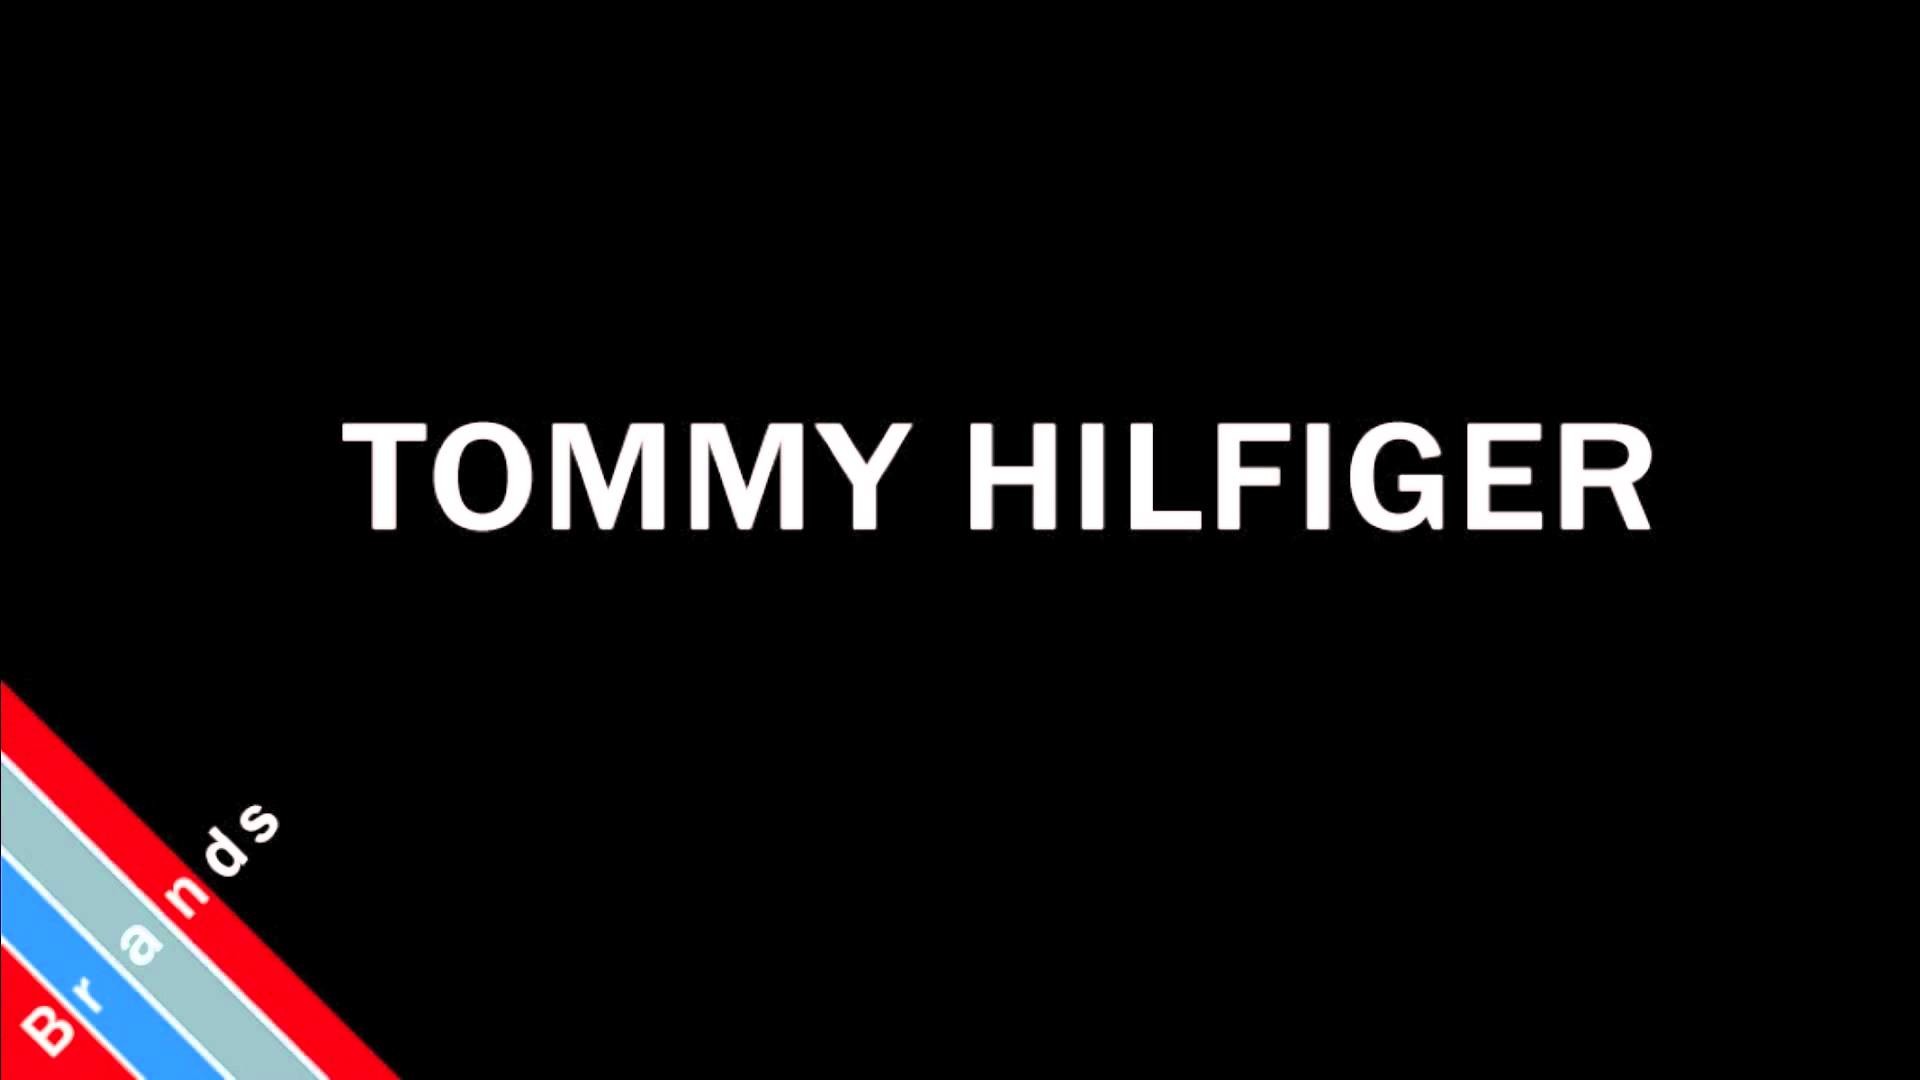 Tommy Hilfiger Wallpapers (82+ images)